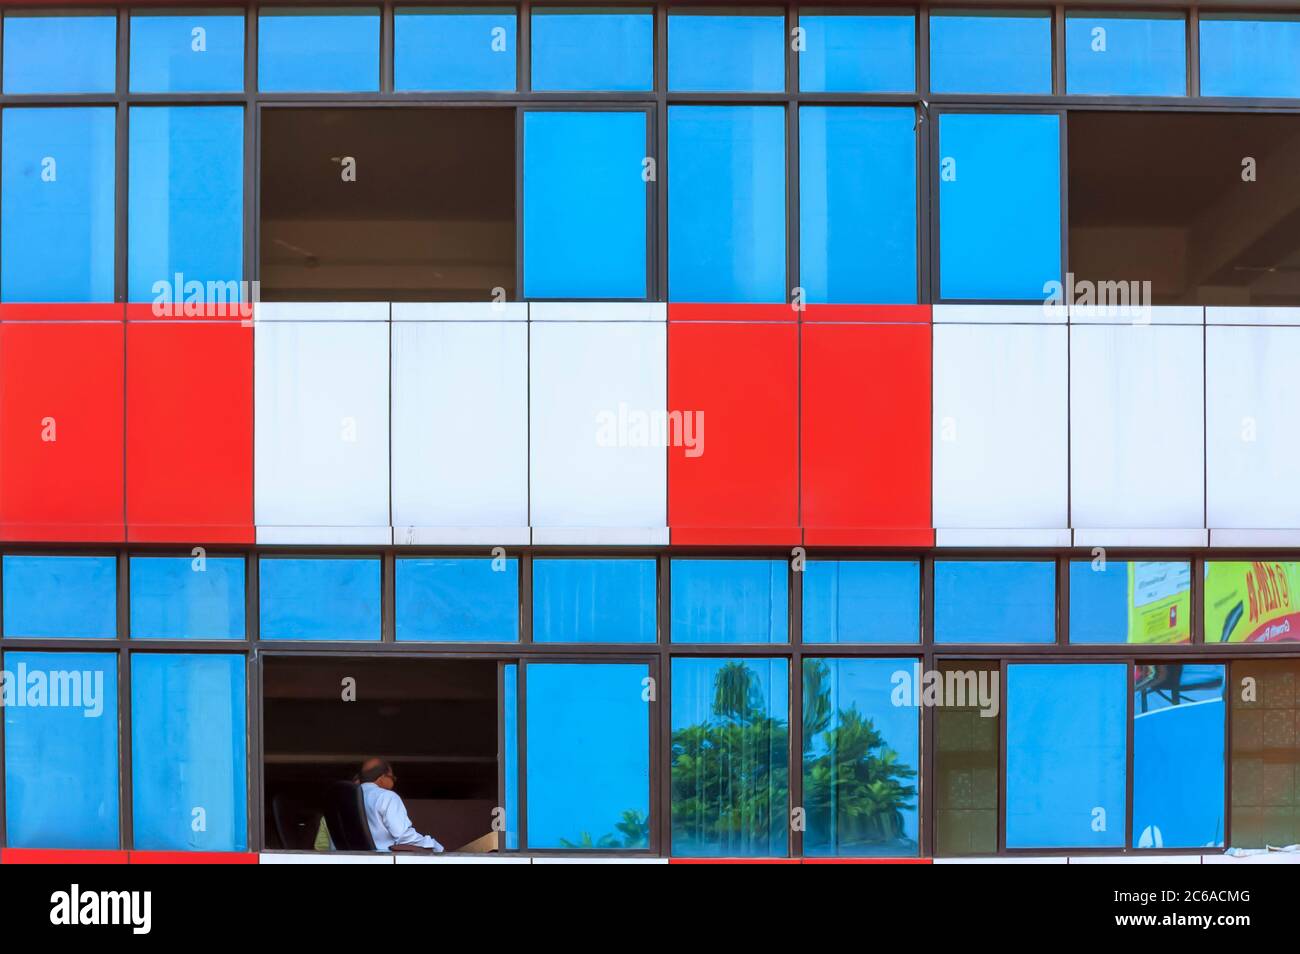 A figure of a man sitting on a chair visible through an open window of a multicolored modern building in Guwahati, Assam, India. Stock Photo